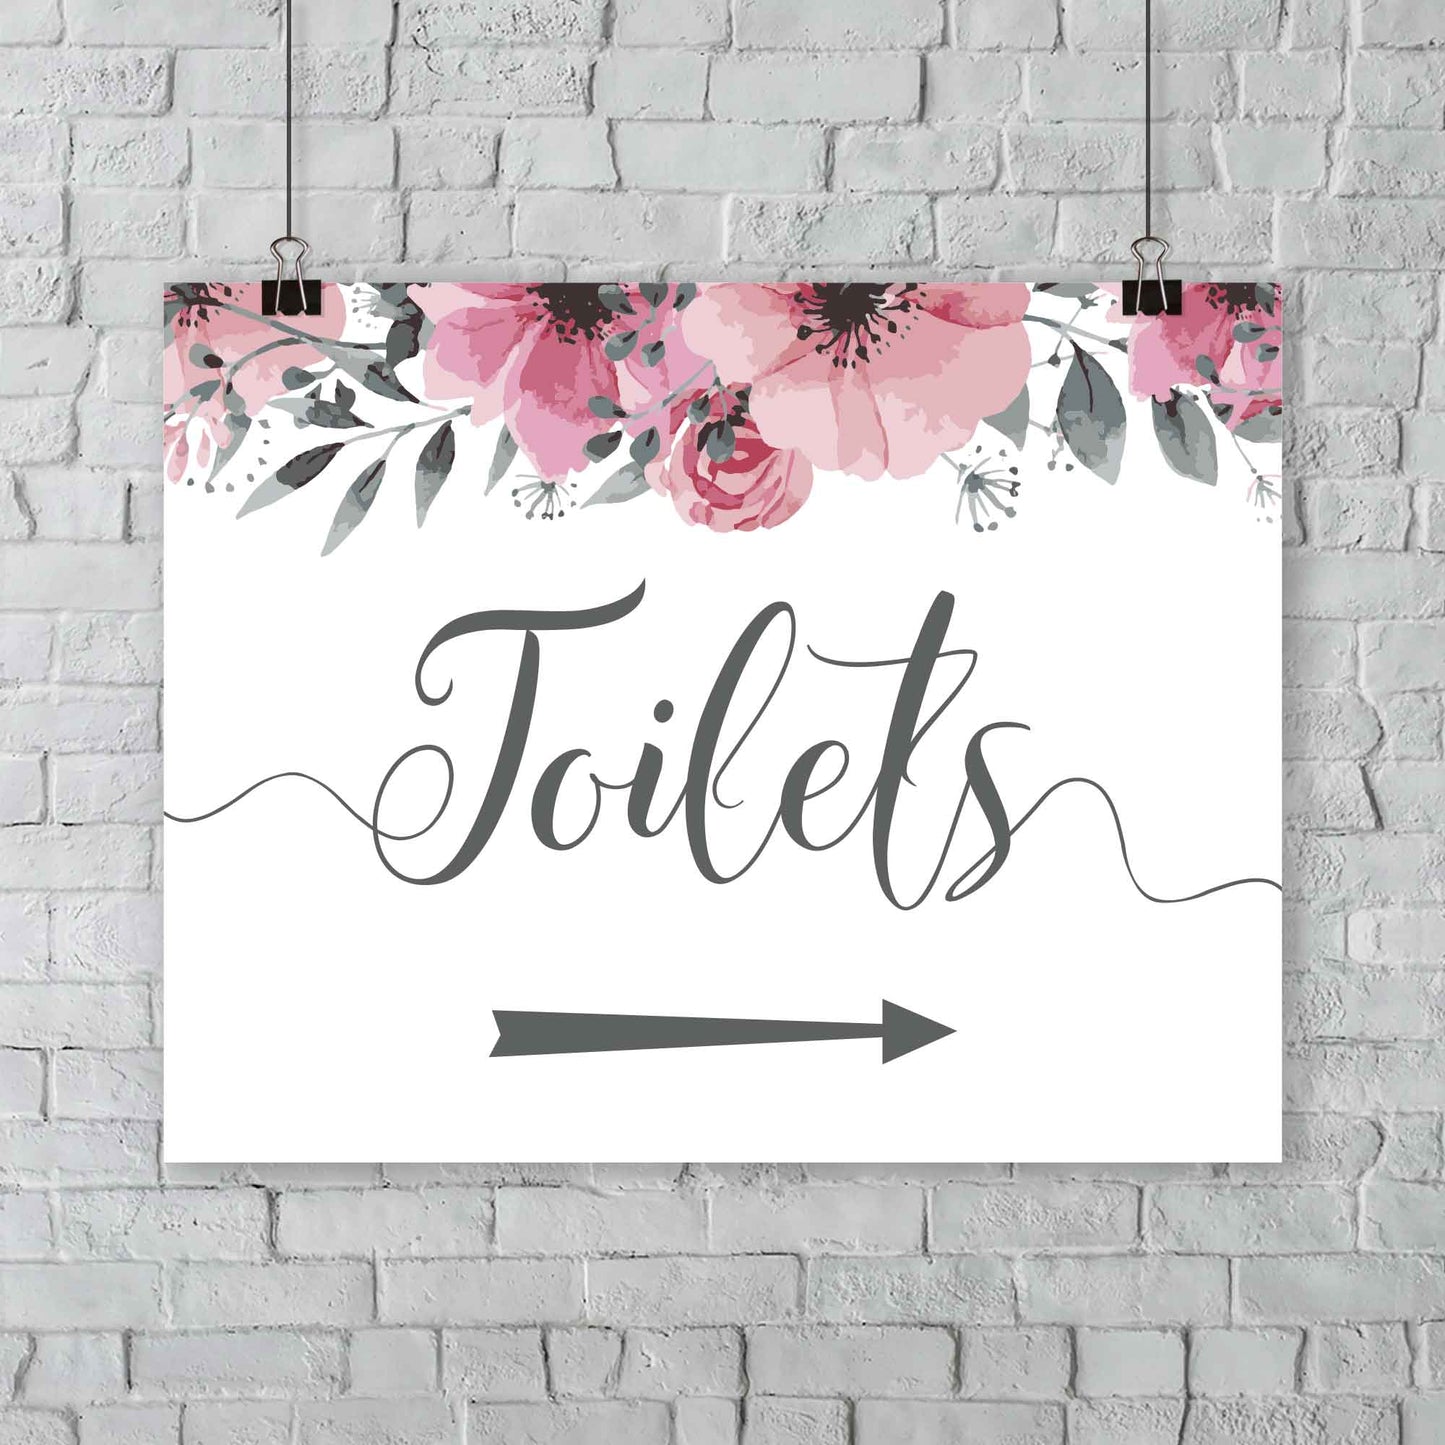 Outdoor wedding toilets sign with boho floral theme